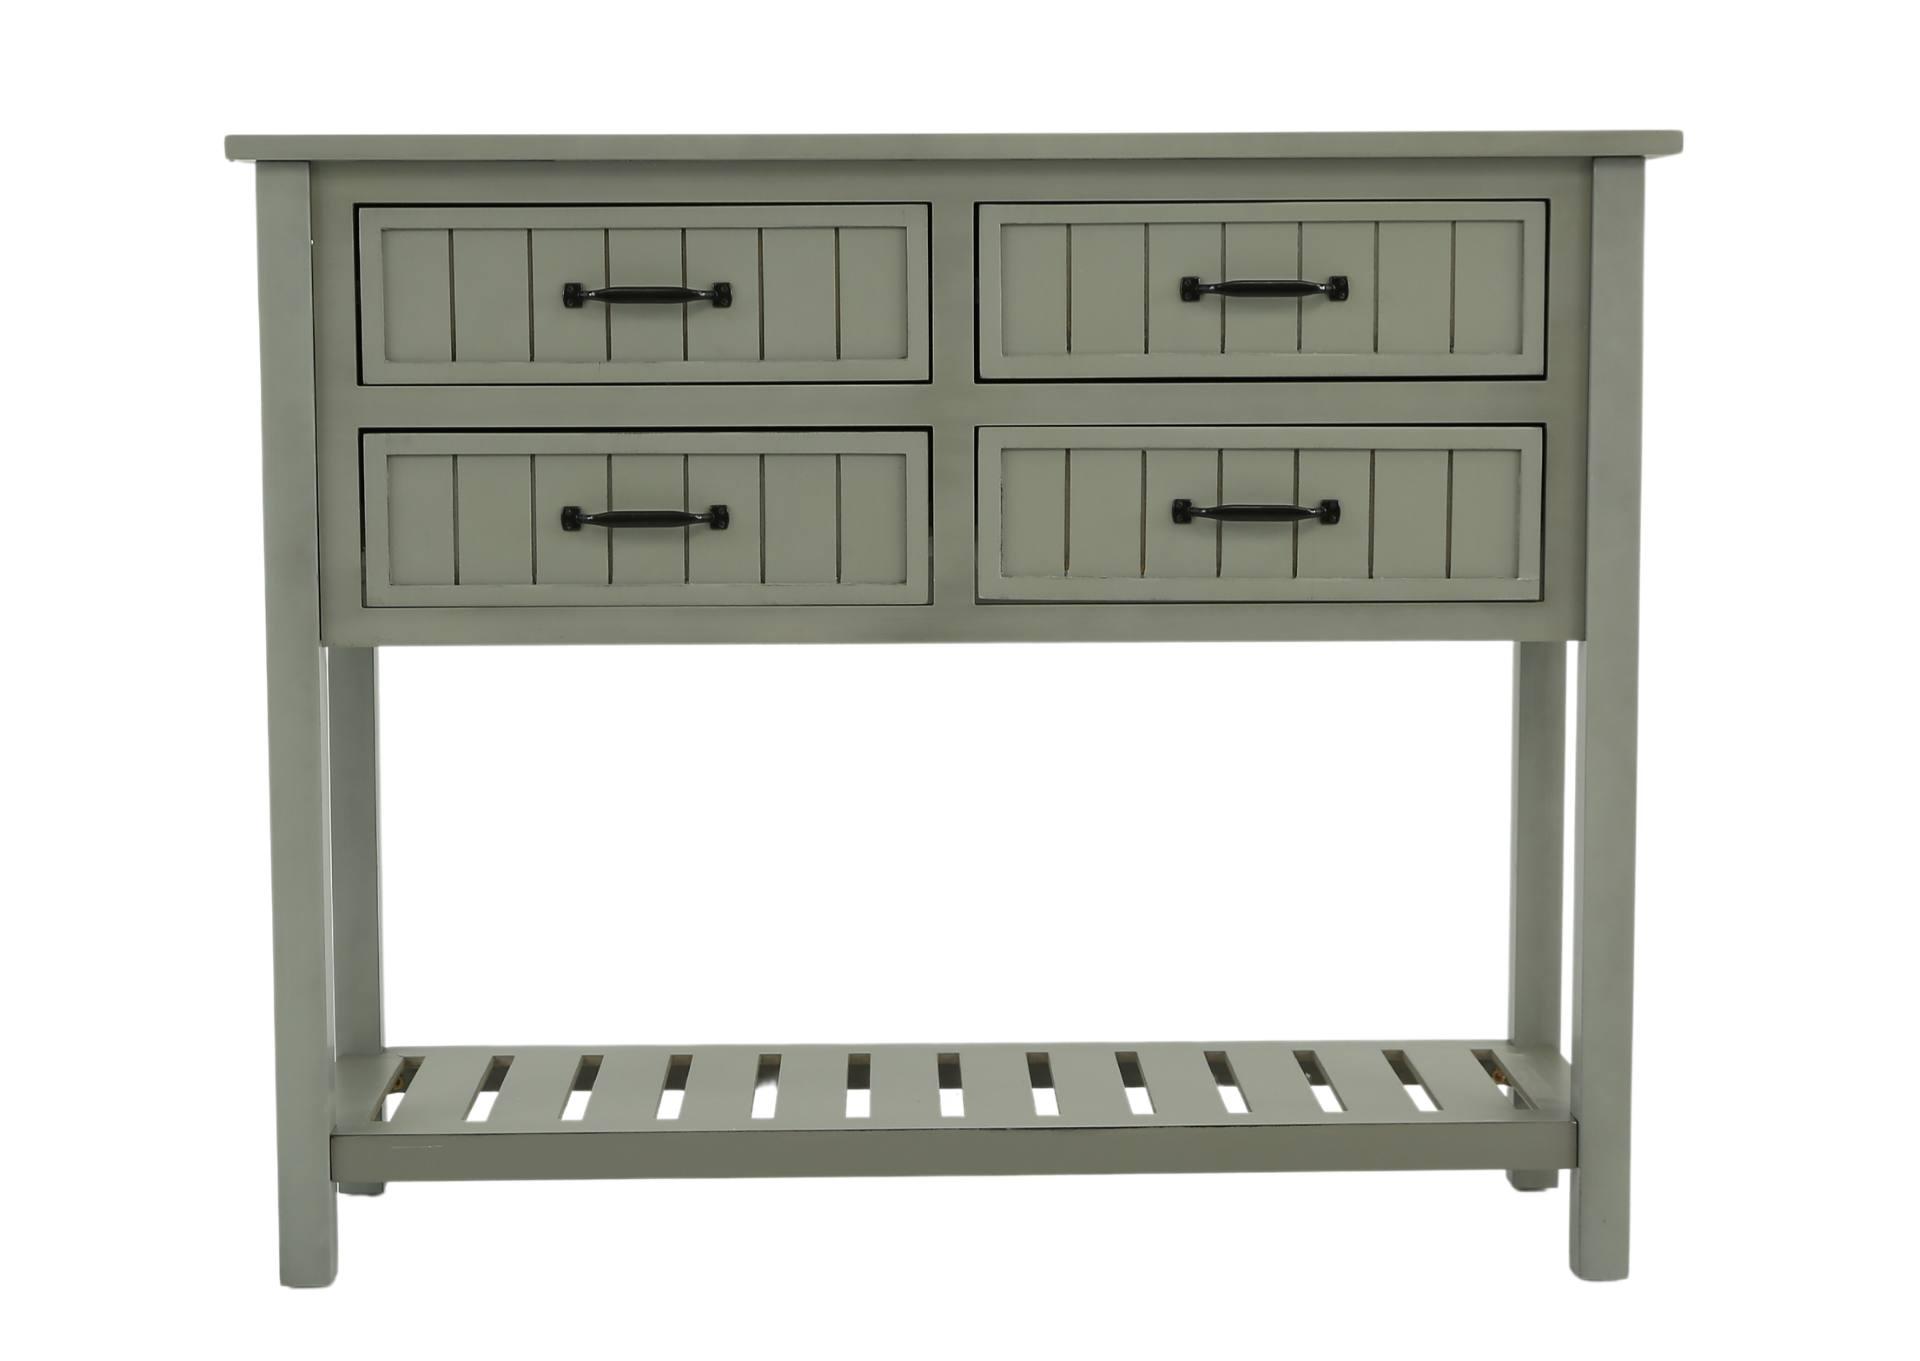 Console Table,CRESTVIEW COLLECTION